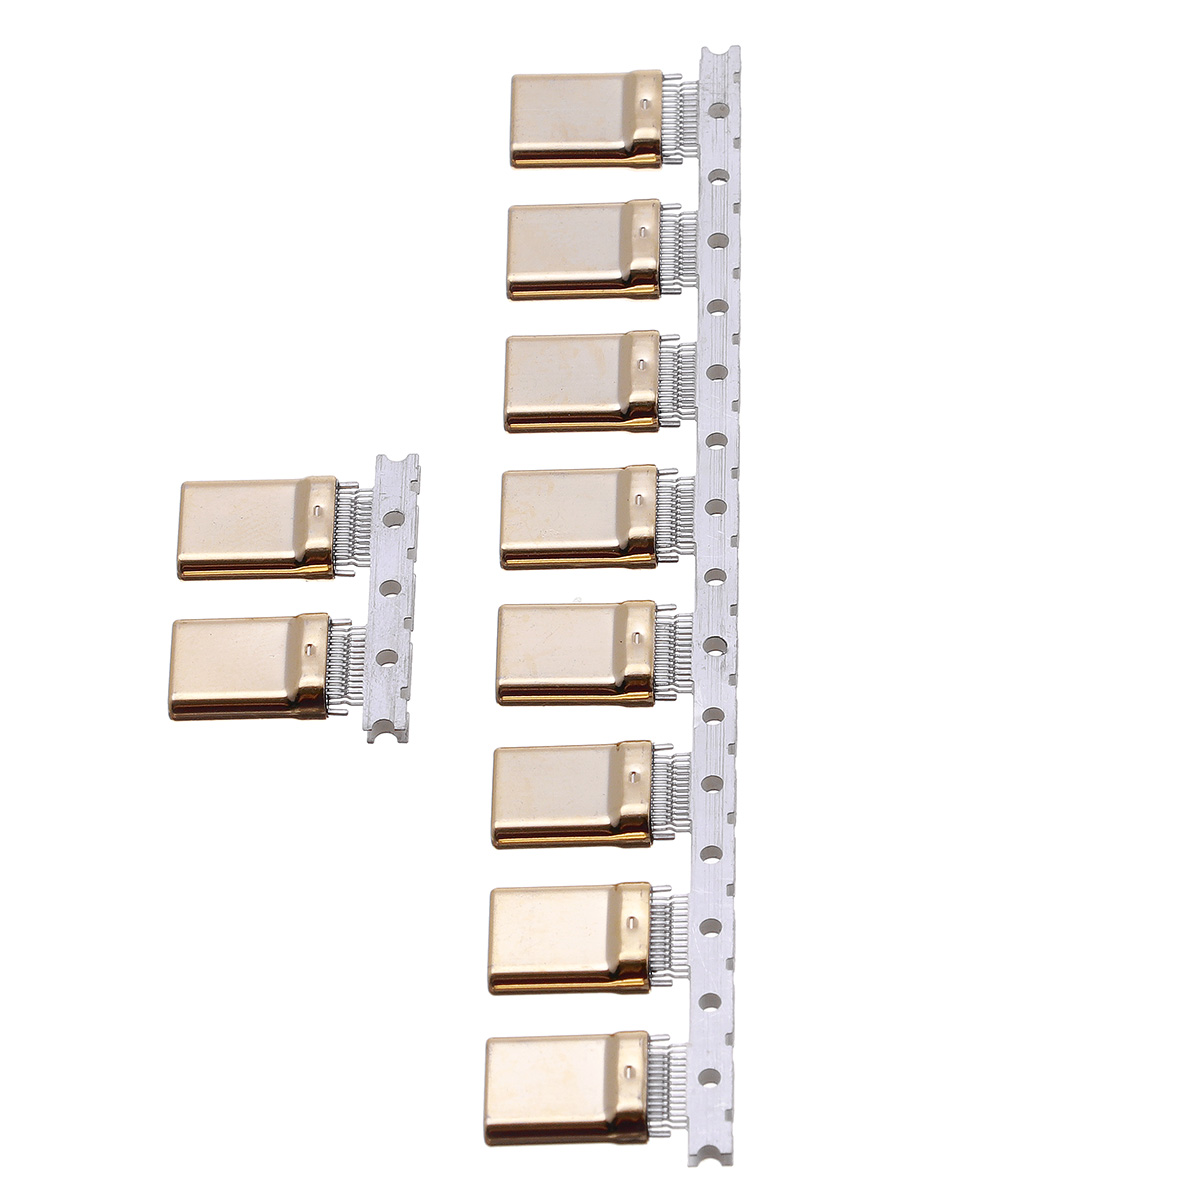 10PCS-31-TYPE-C-Stretch-Male-Shell-Full-Gold-Plated-1U-24P-Double-Sided-Splint-09-Card-Hook-Foot-L10-1845789-3